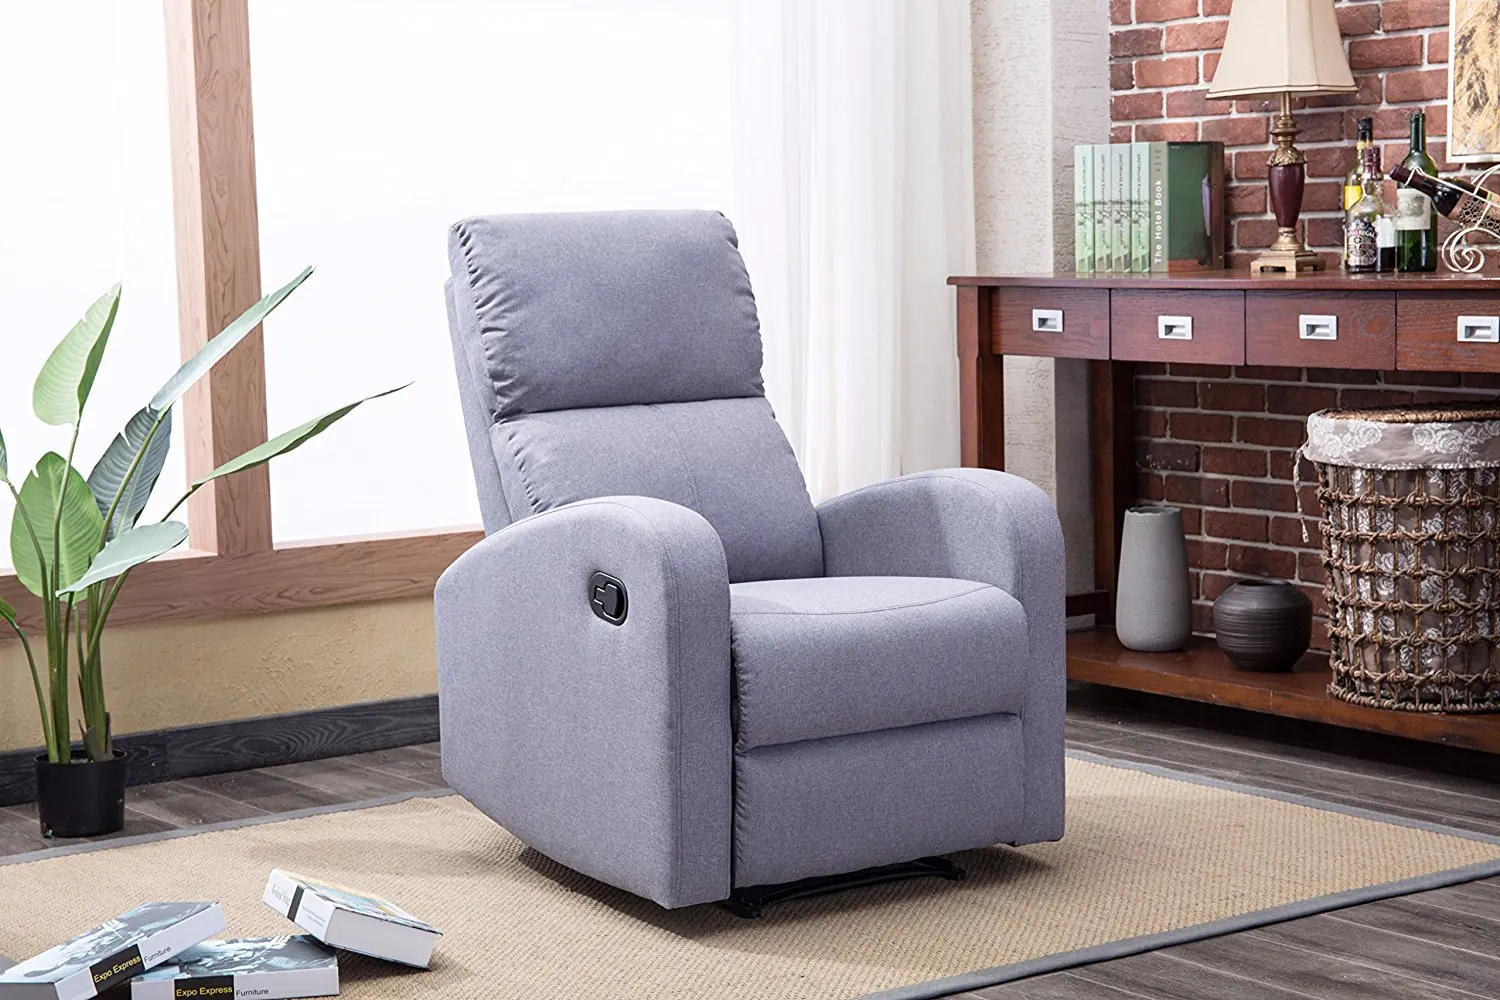 Cheap Fabric Recliner Sofas Sale, find Fabric Recliner Sofas Sale deals